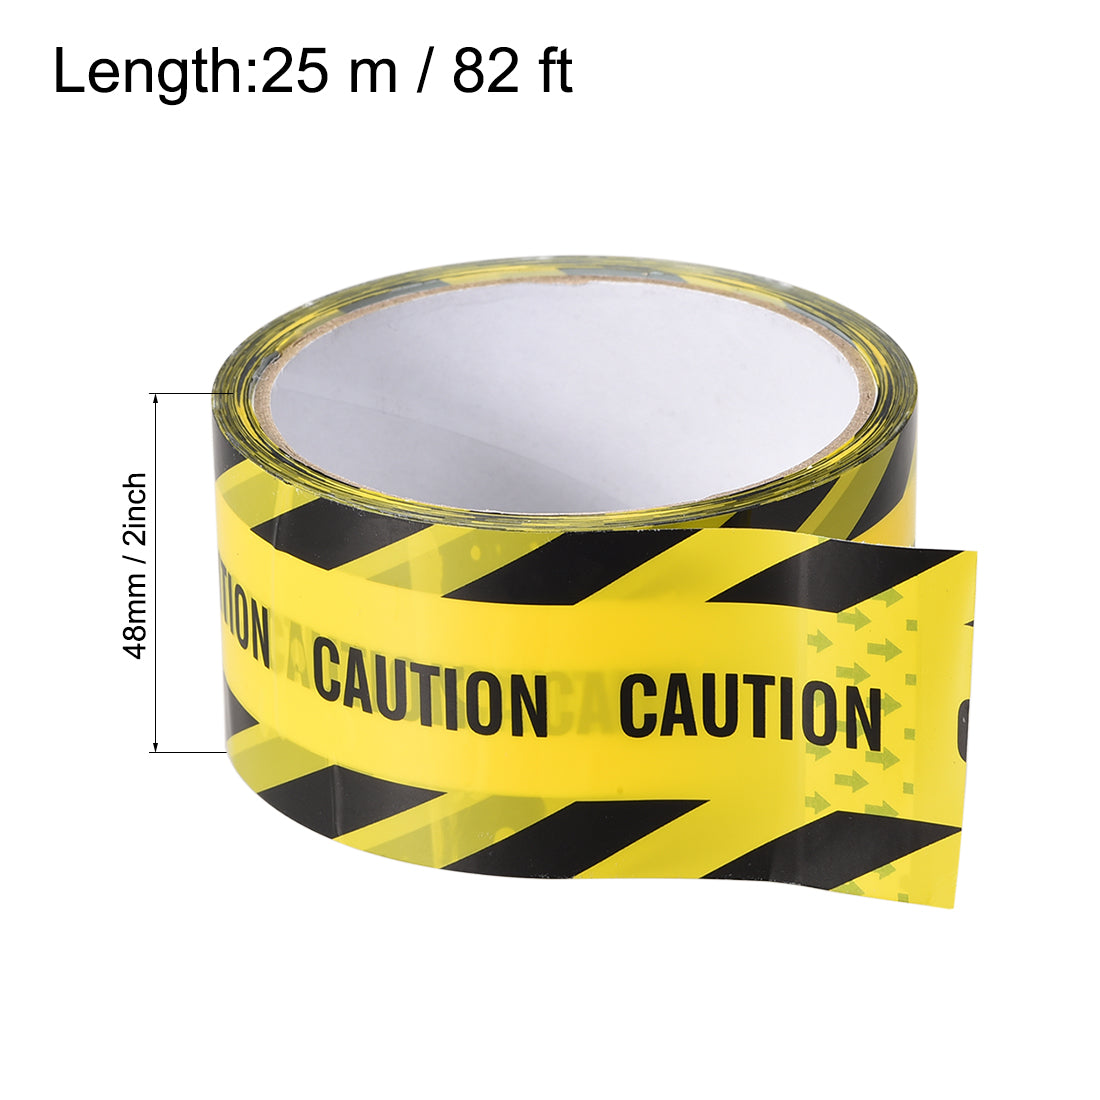 uxcell Uxcell Caution Stripe Sticker Adhesive Tape CAUTION Mark, 82 Ft x 2 Inch(LxW), Yellow Black for Workplace Office Wet Floor Caution